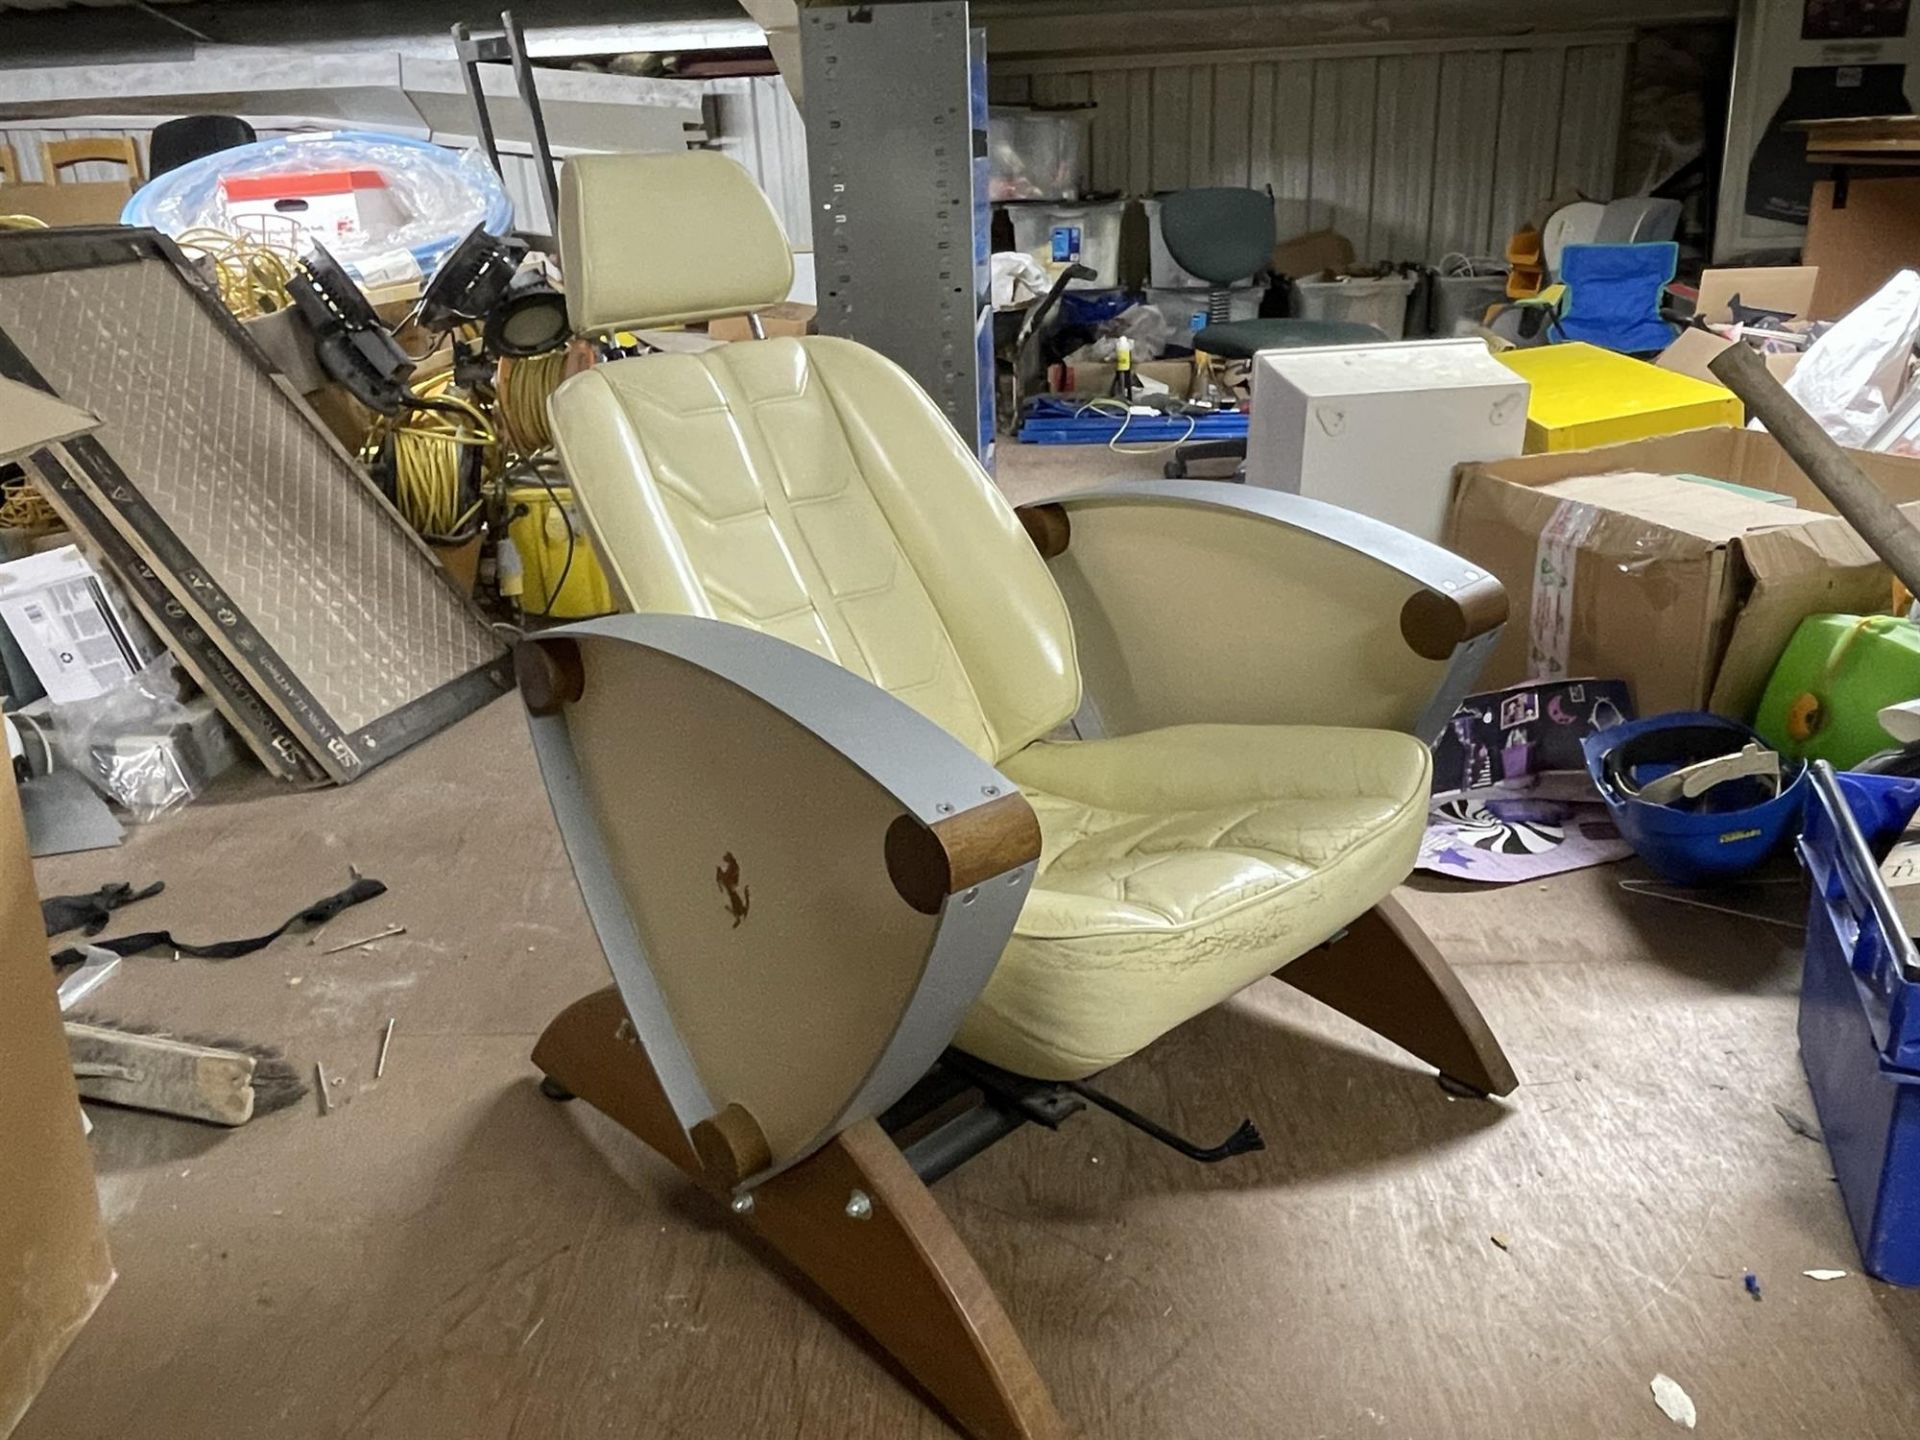 Pair of Ferrari 308 Crema Leather Seats on Substantial Bases - Image 6 of 10